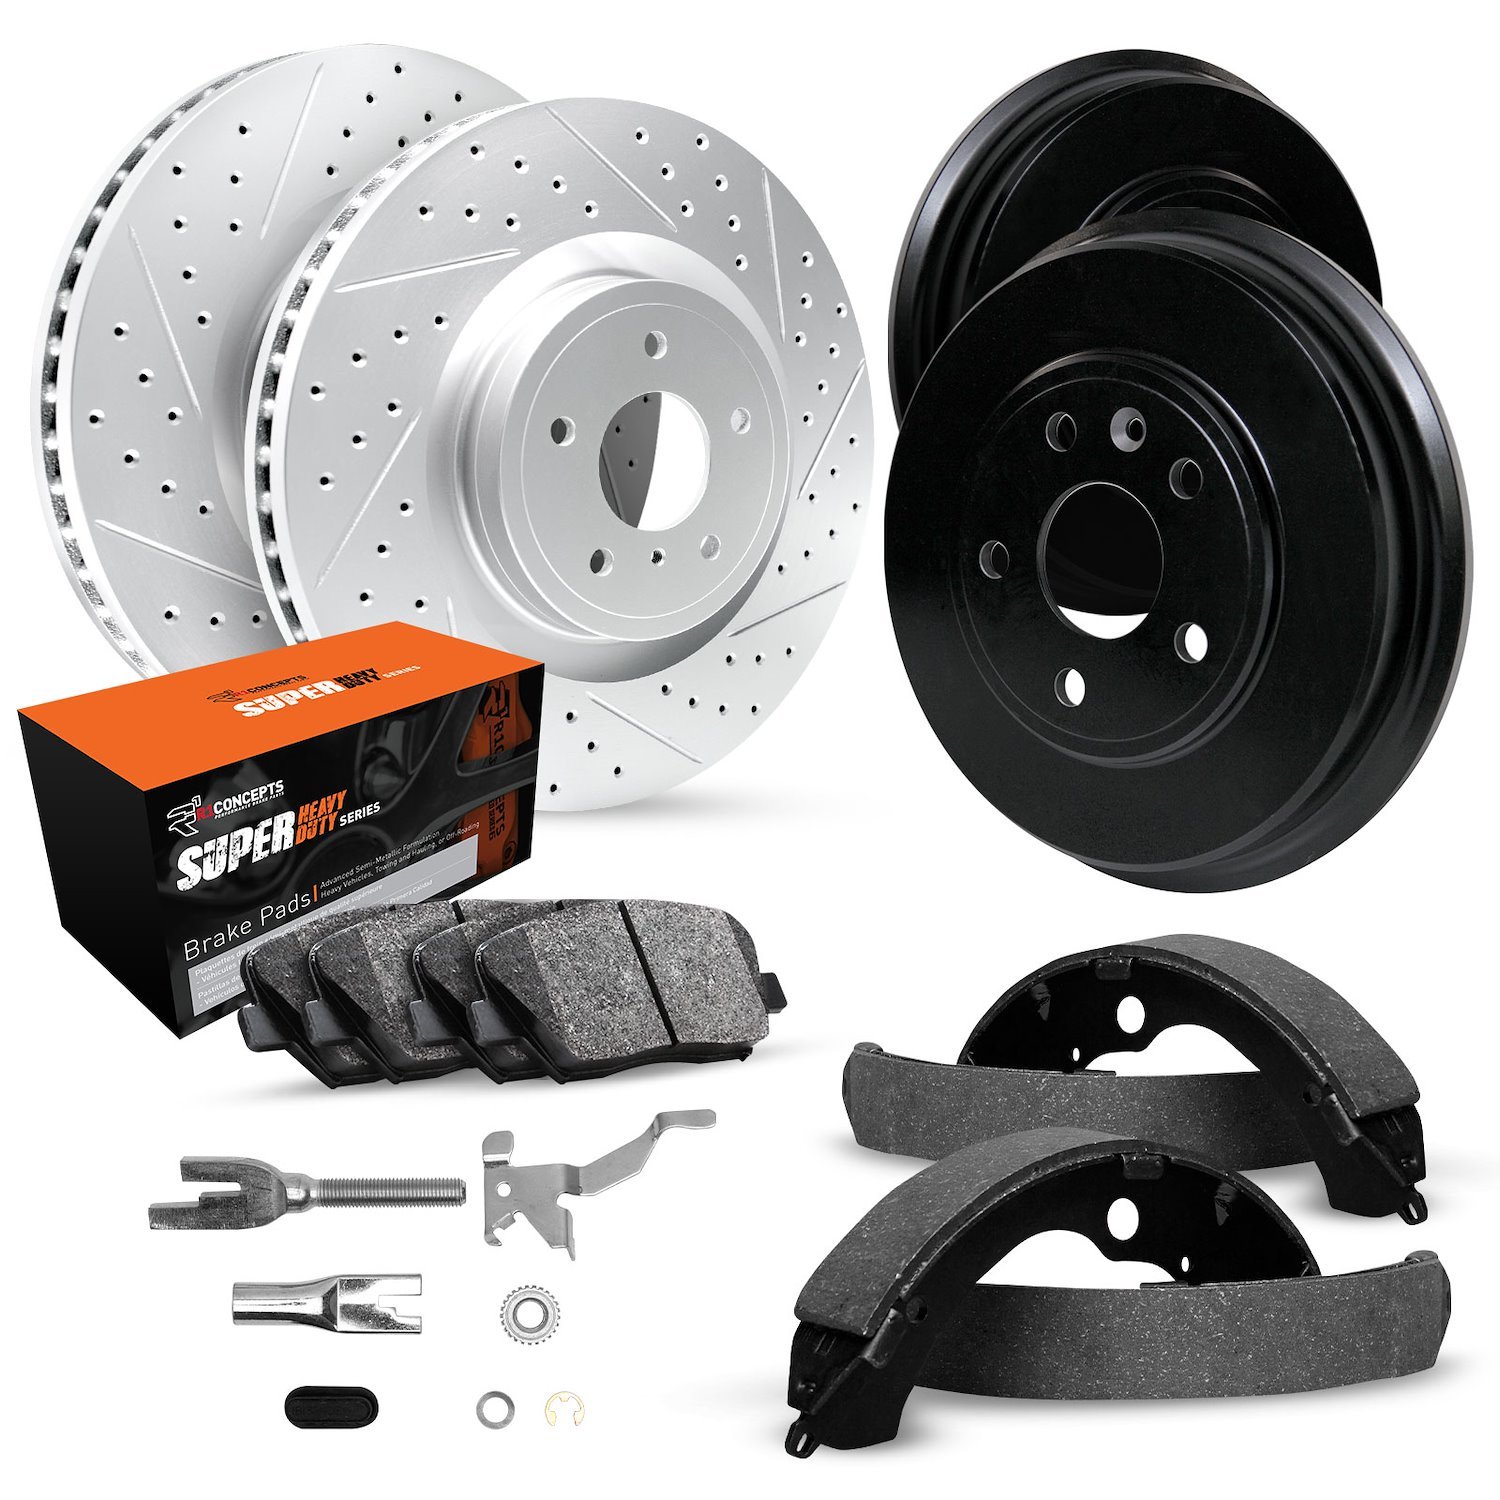 GEO-Carbon Drilled/Slotted Rotors/Drums w/Super-Duty Pads/Shoes/Adjusters, 1974-1996 GM, Position: Front/Rear